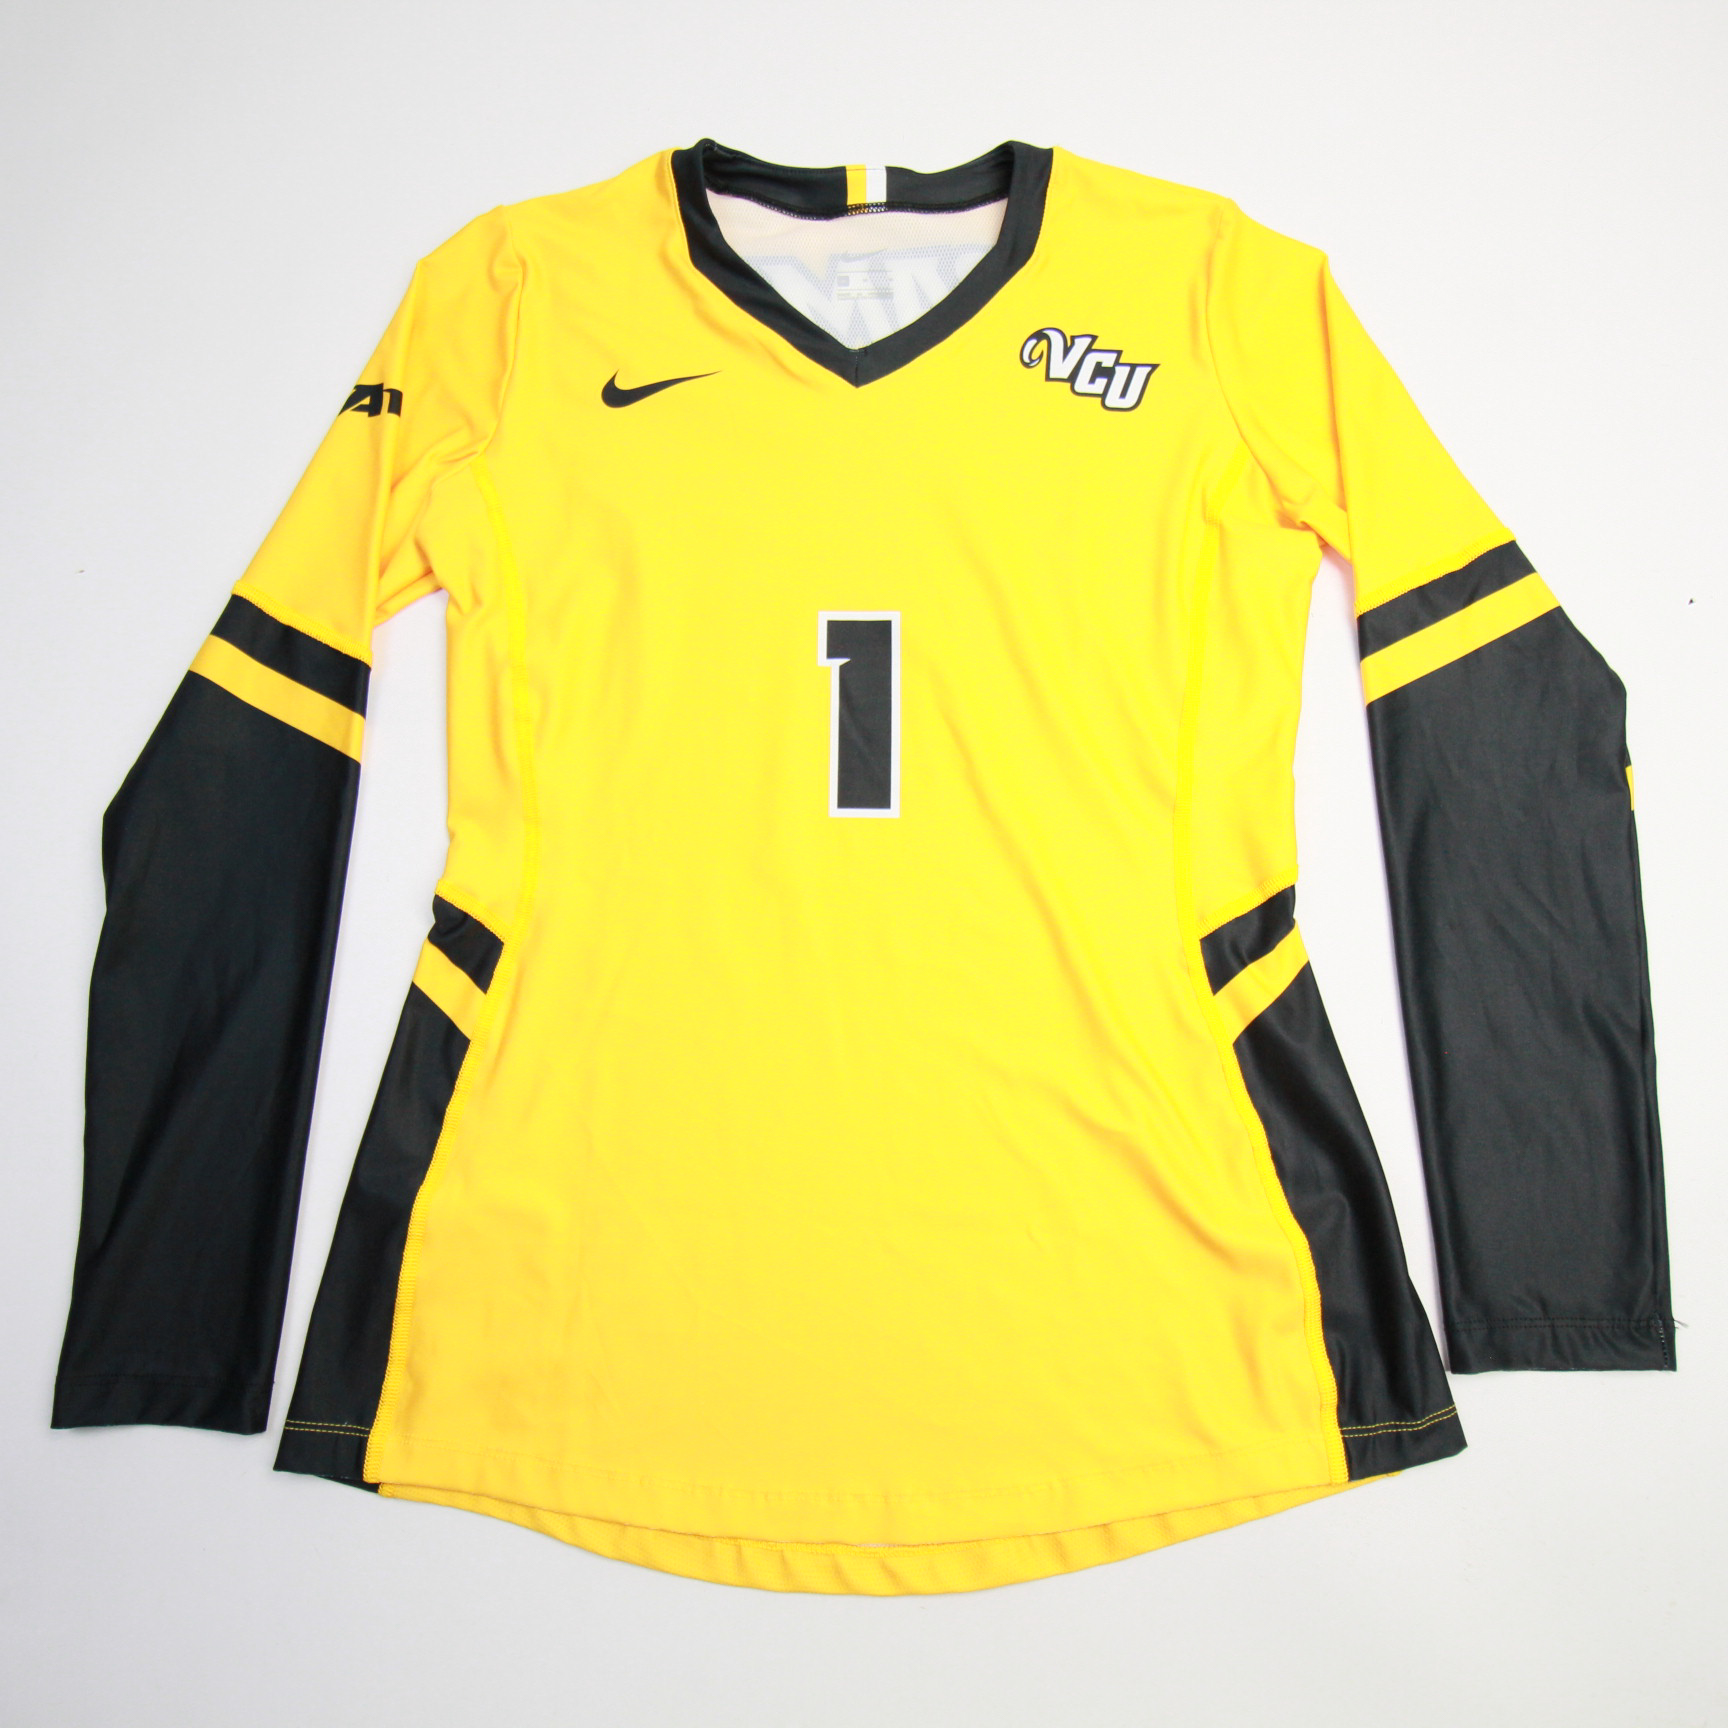 VCU Rams Nike Game Jersey - Volleyball Women's Yellow/Black Used